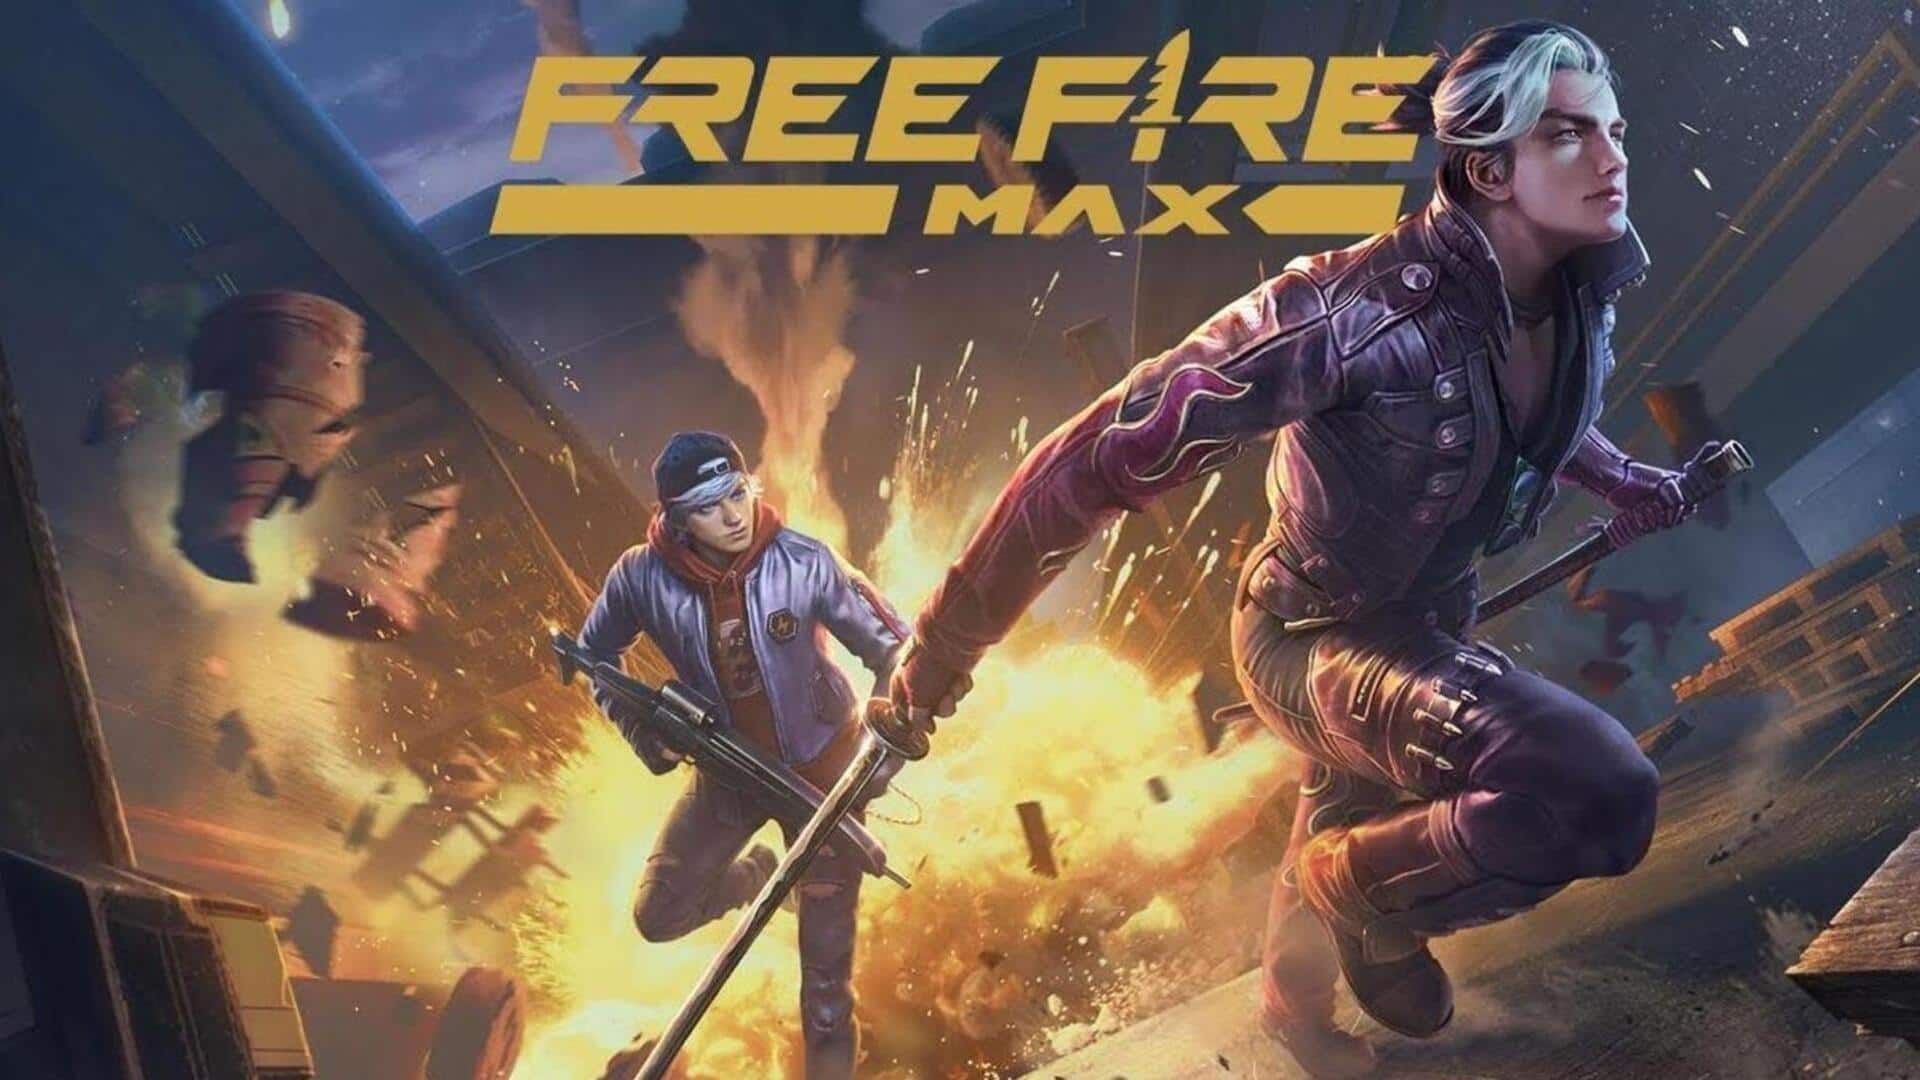 Garena Free Fire MAX redeem codes released for December 17